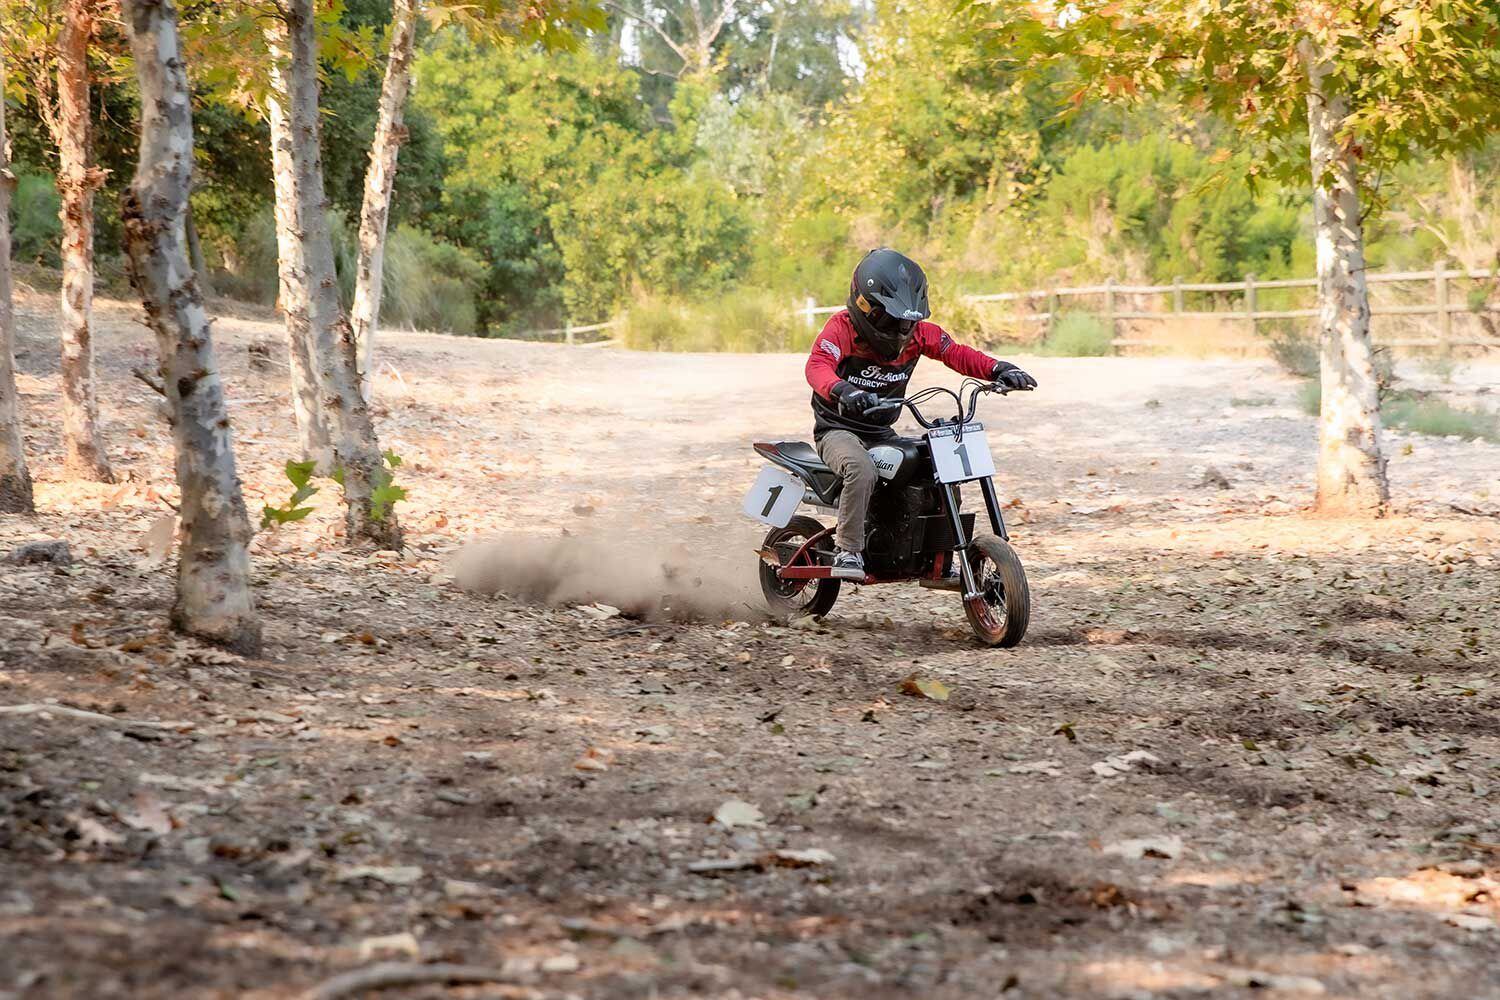 This is Indian Motorcycle’s first electric kids’ bike.